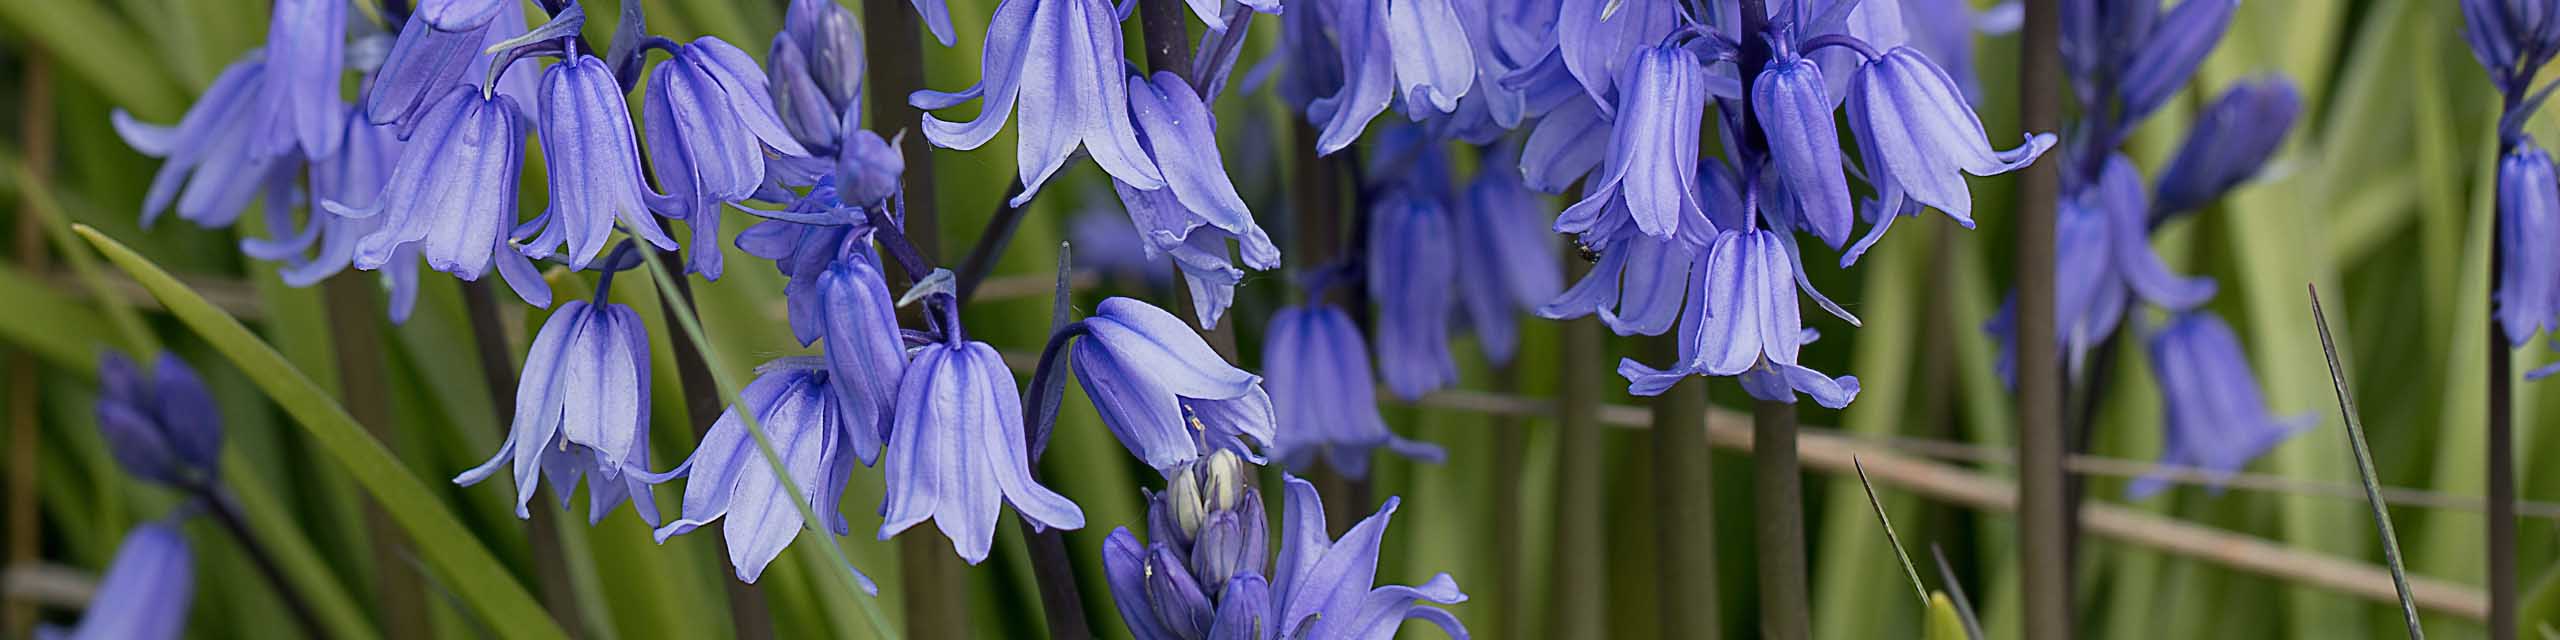 Closeup of English bluebells in bloom.